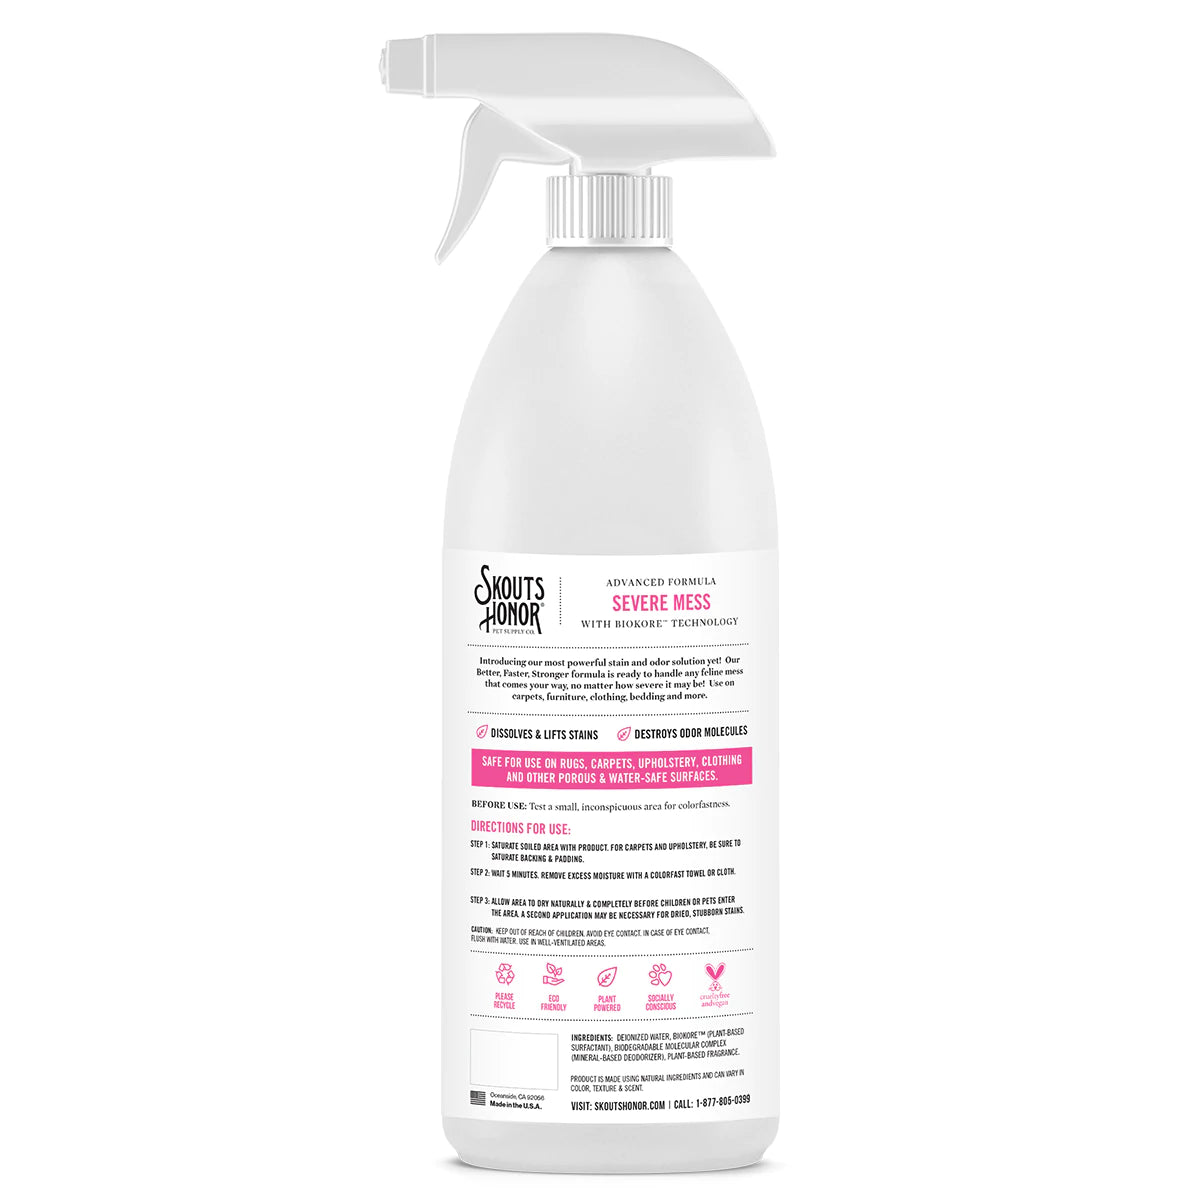 Skout's Honor Stain & Odor Severe Mess Advanced Formula Cat 35oz - Paw Naturals